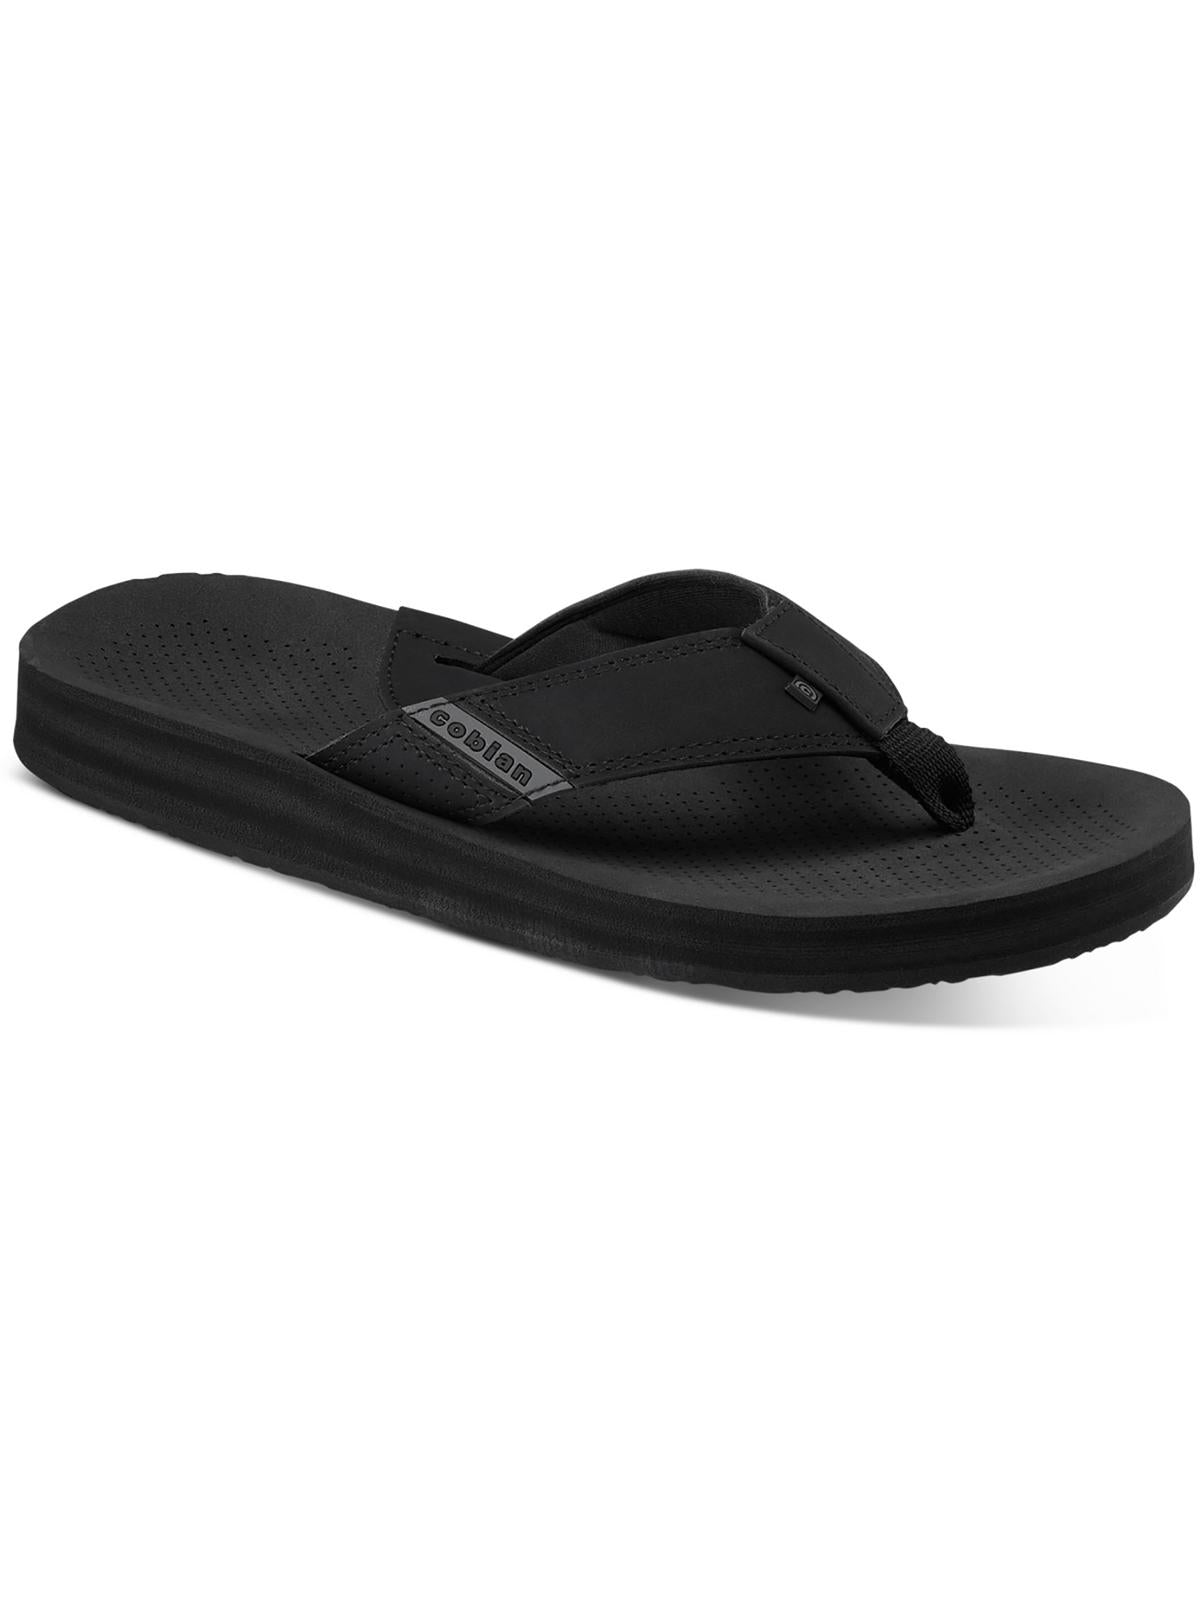 Shop Cobian Mens Slip On Casual Thong Sandals In Black